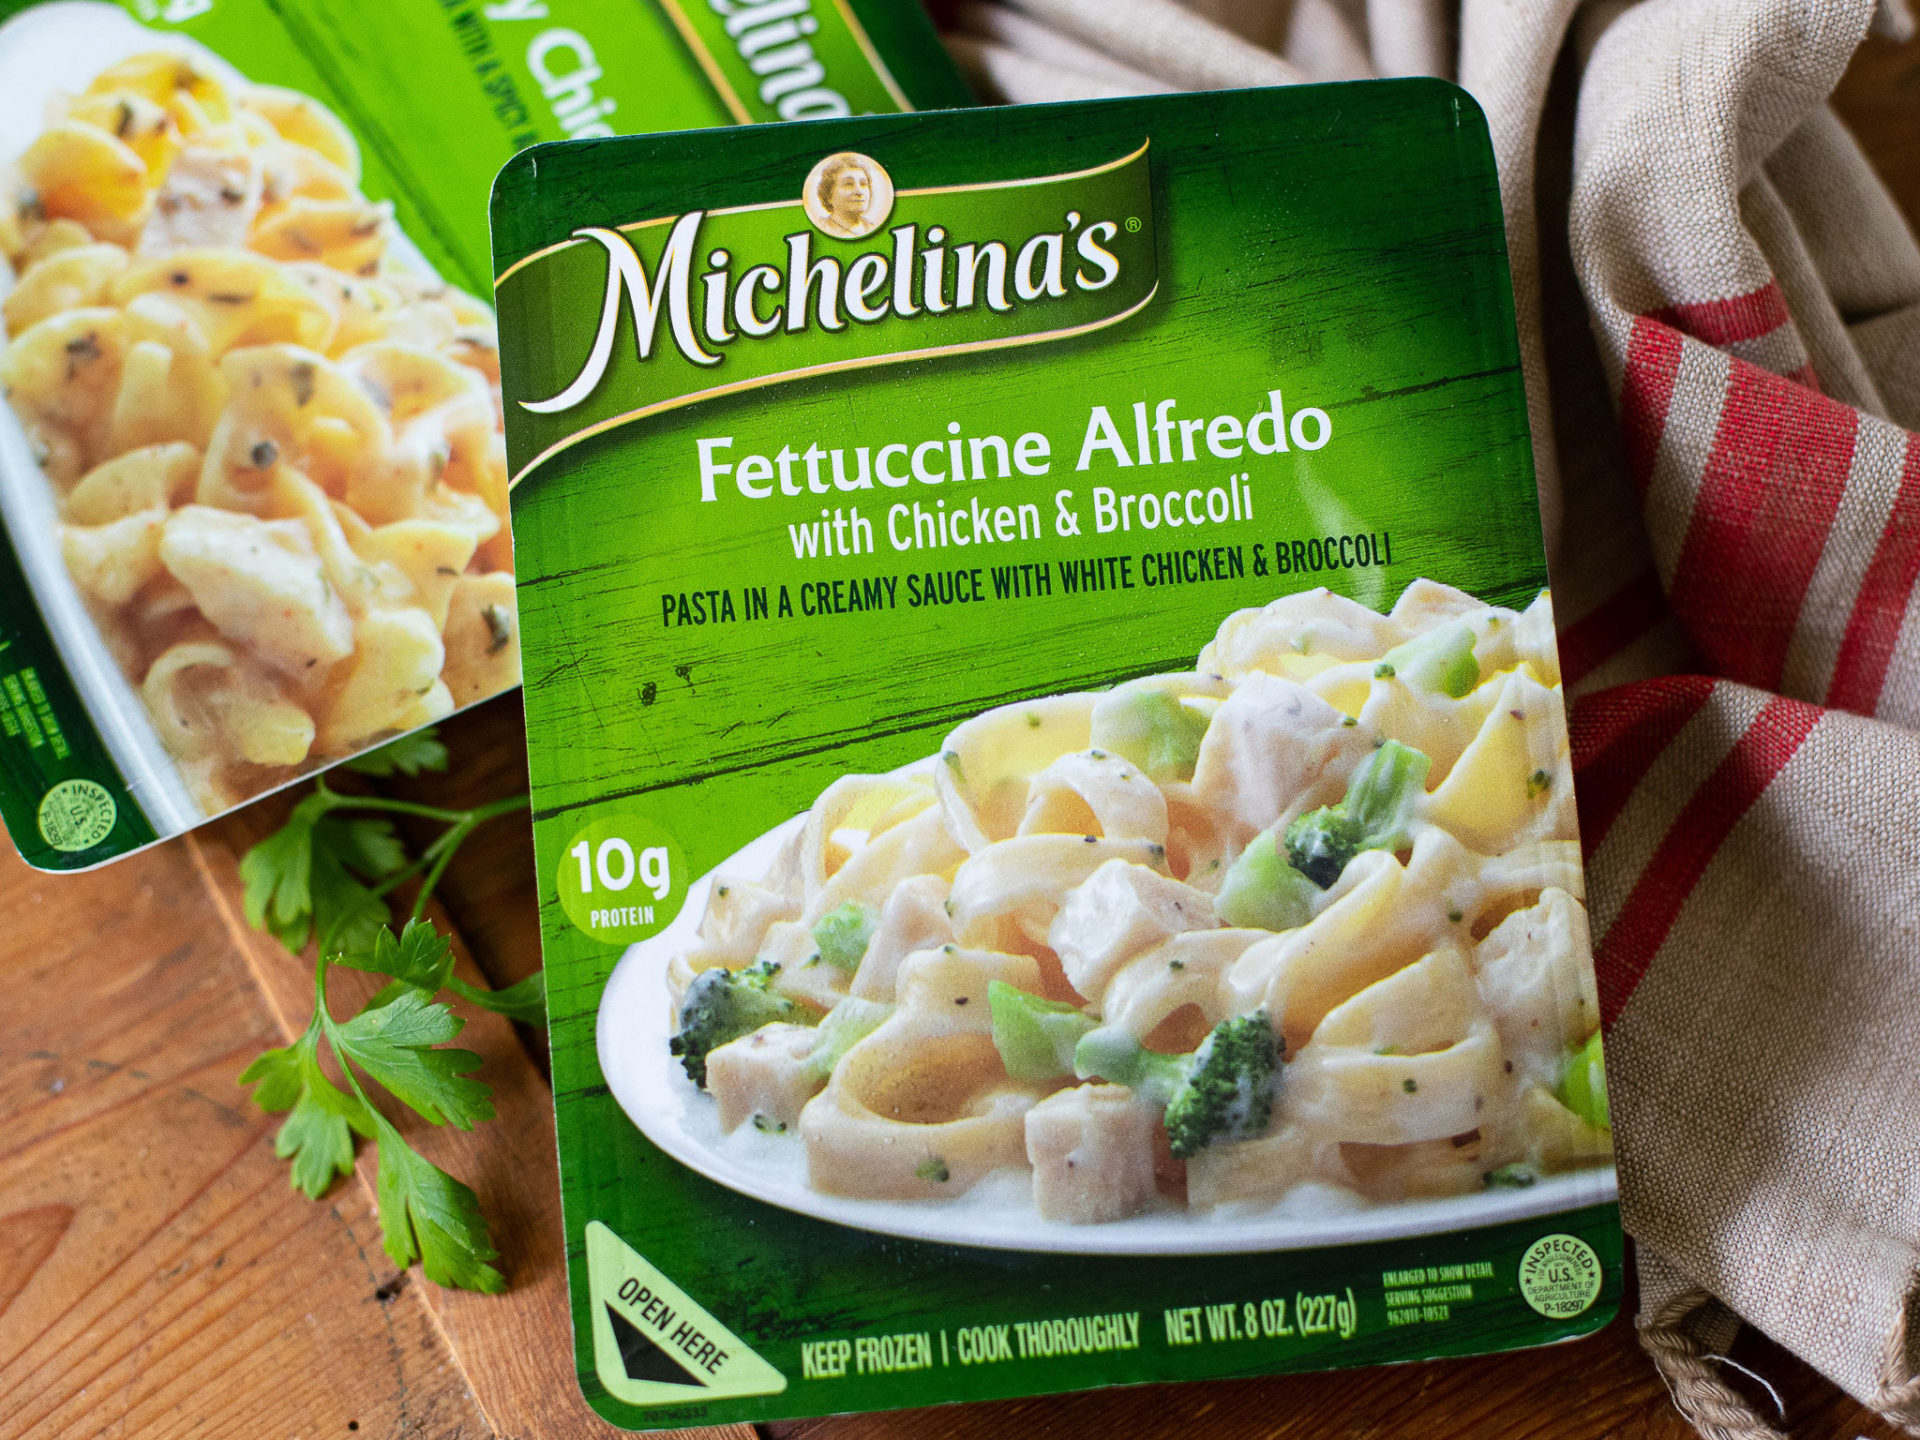 Michelina’s Frozen Entrees Are Just 60¢ At Kroger